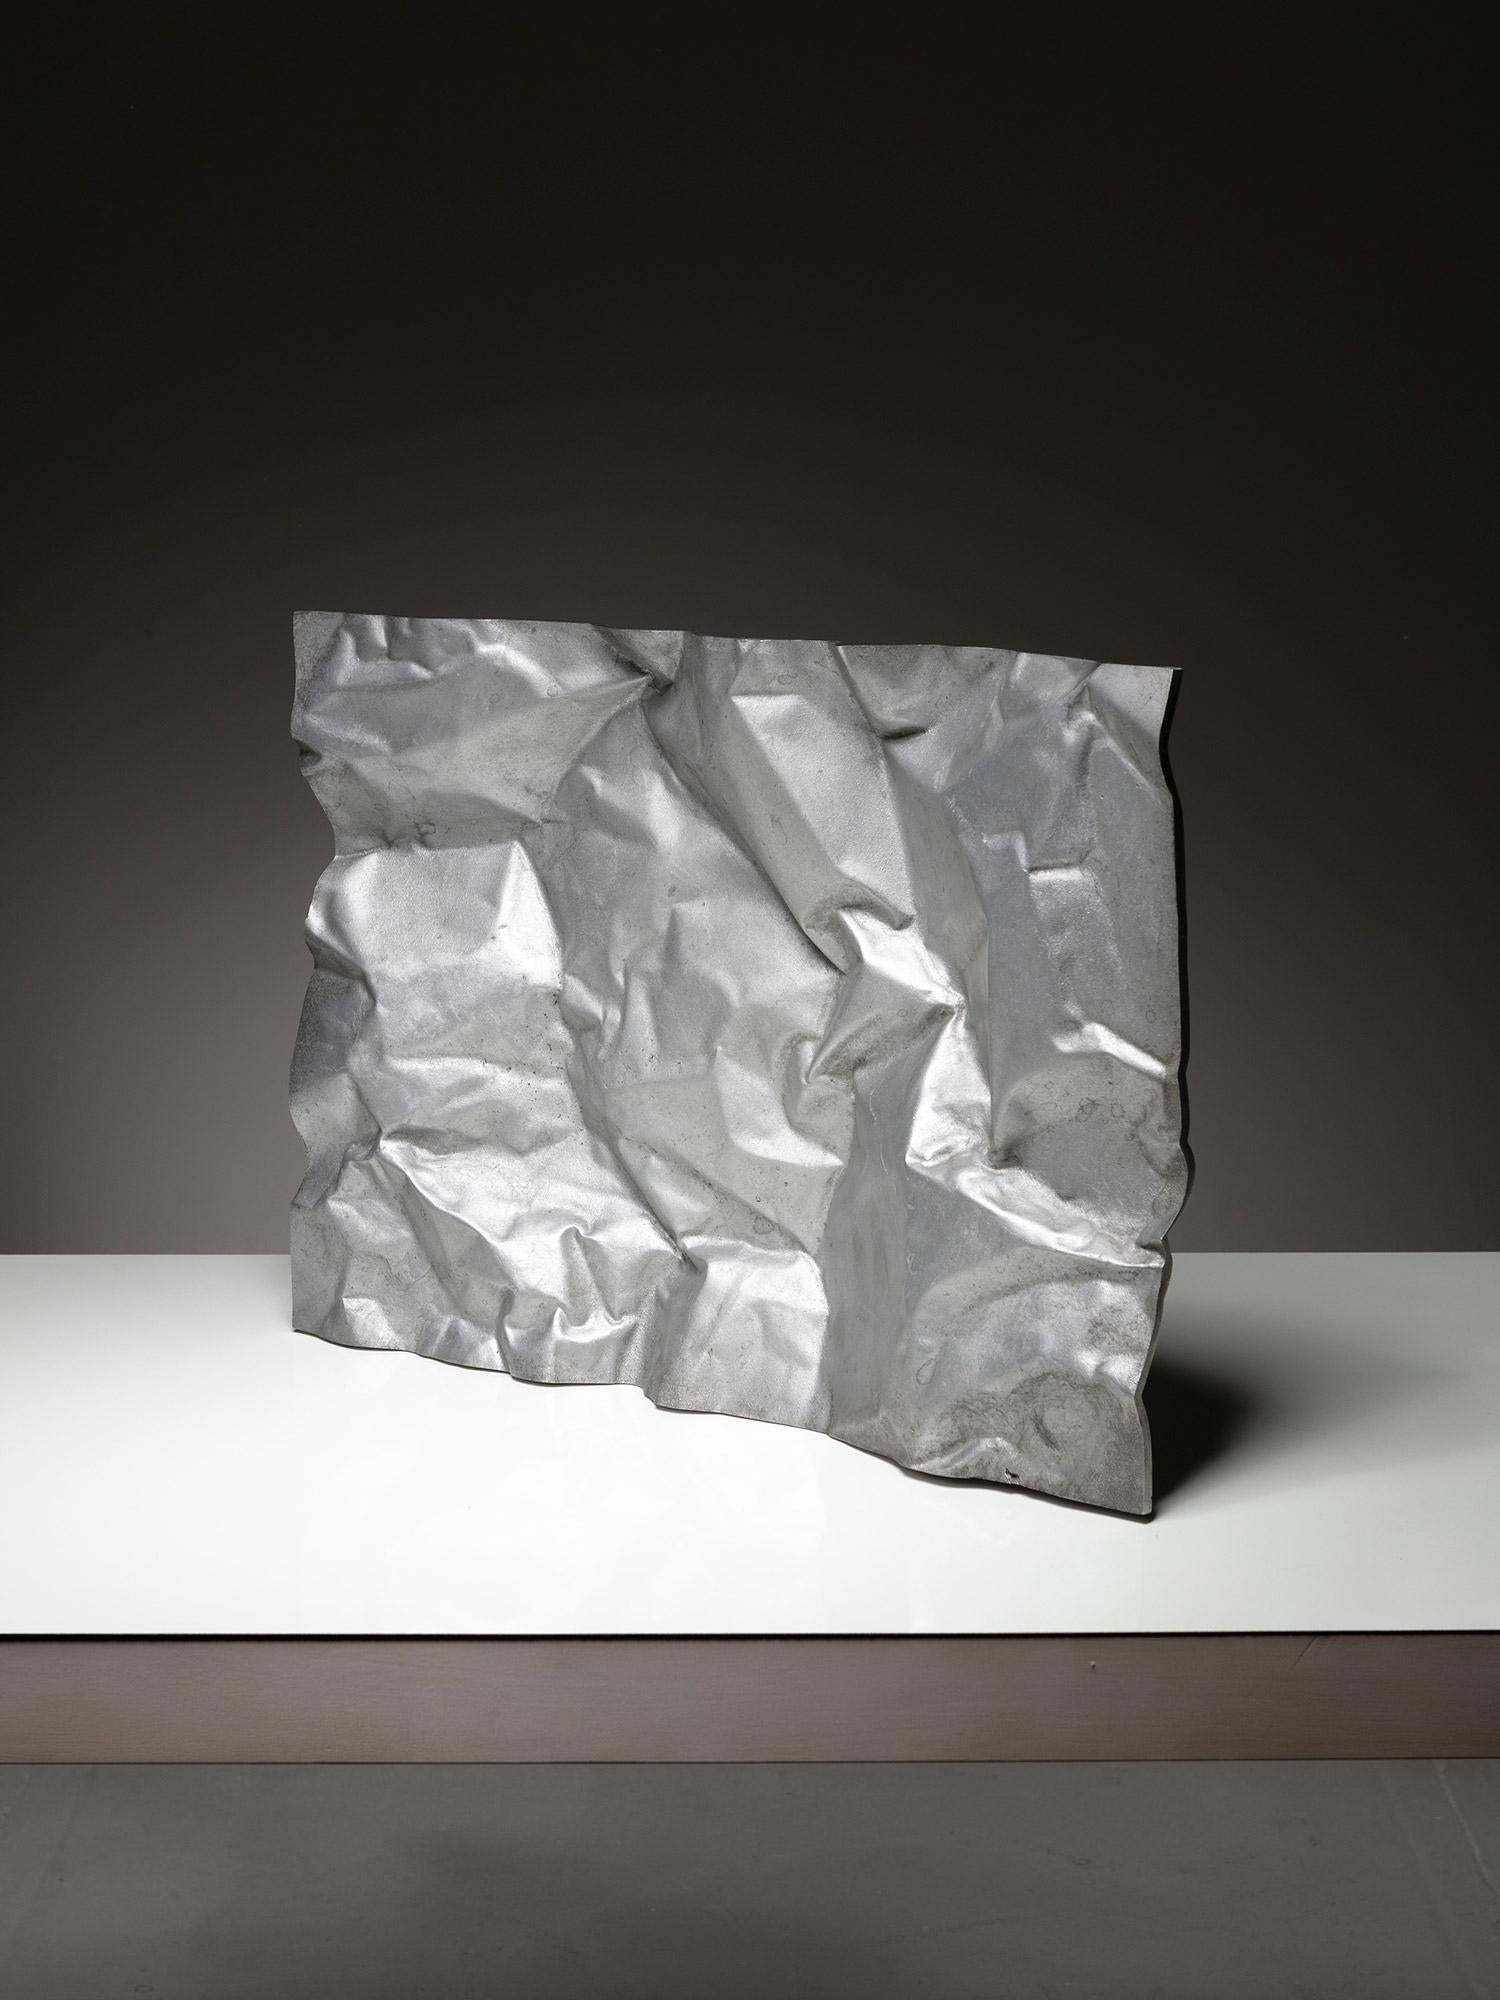 Italian Aluminum Centerpiece Sculpture by Gruppo NP2, Nerone and Patuzzi, Italy, 1970s For Sale